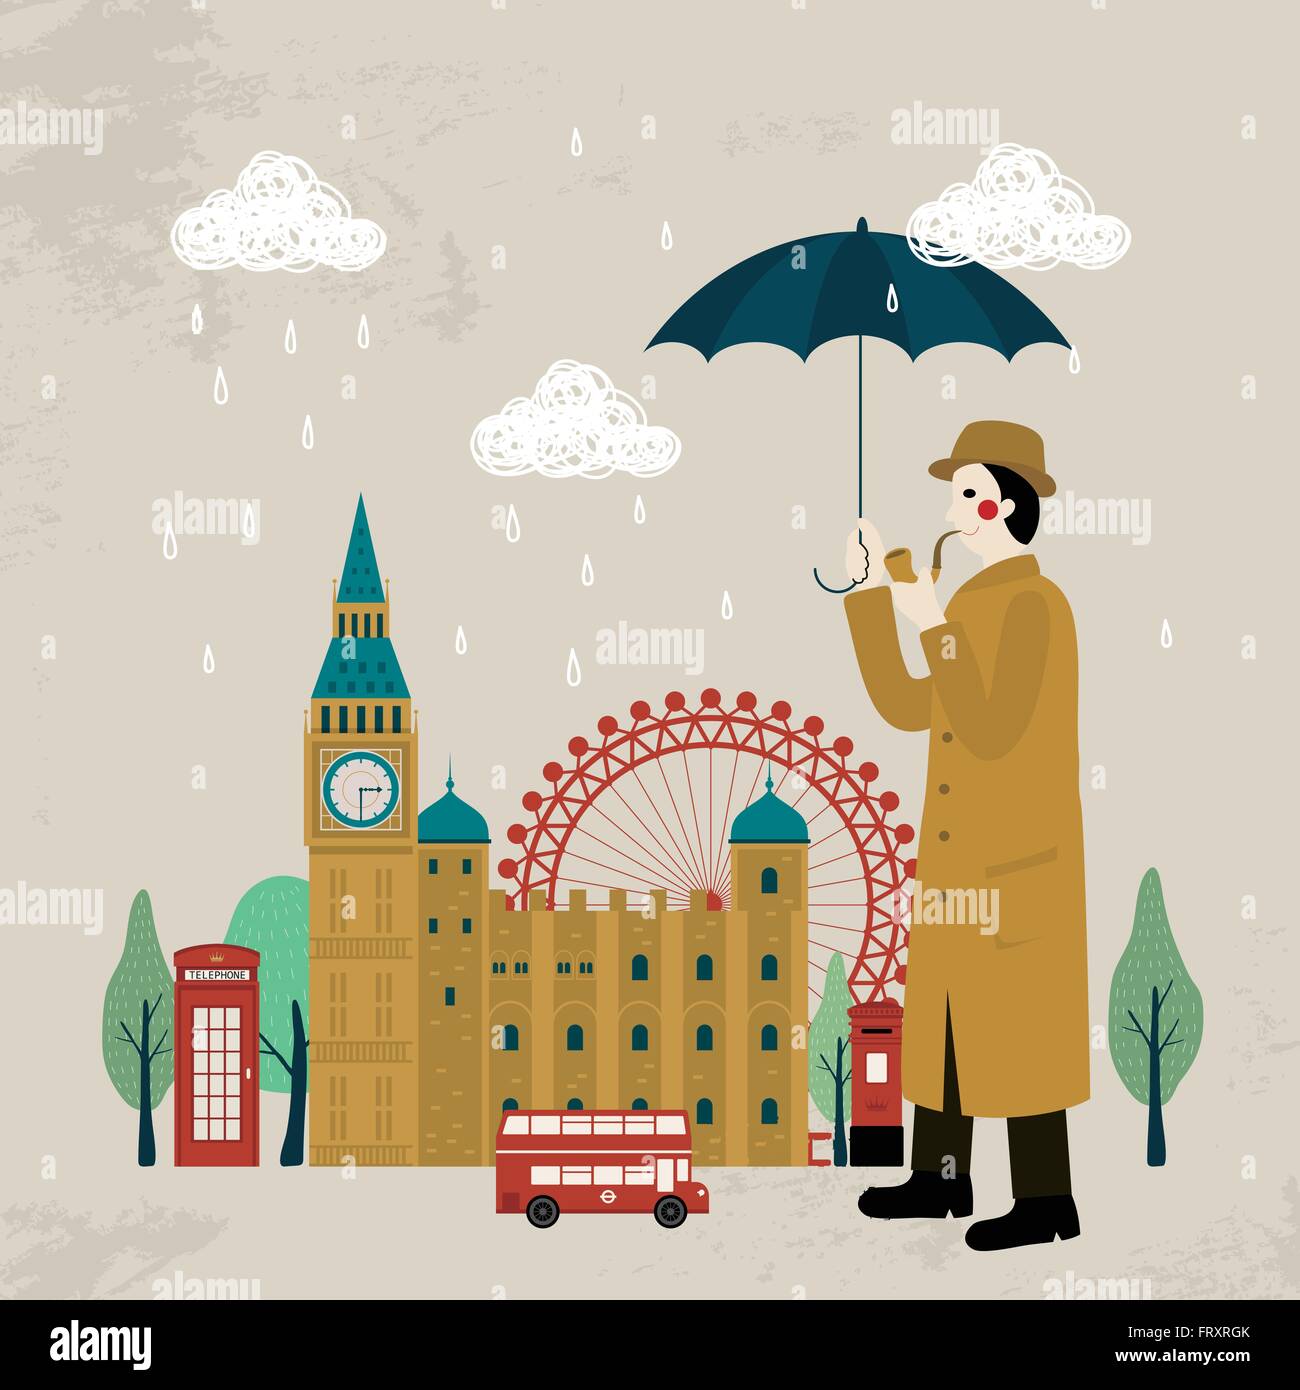 lovely United Kingdom impression design - detective and attractions Stock Vector